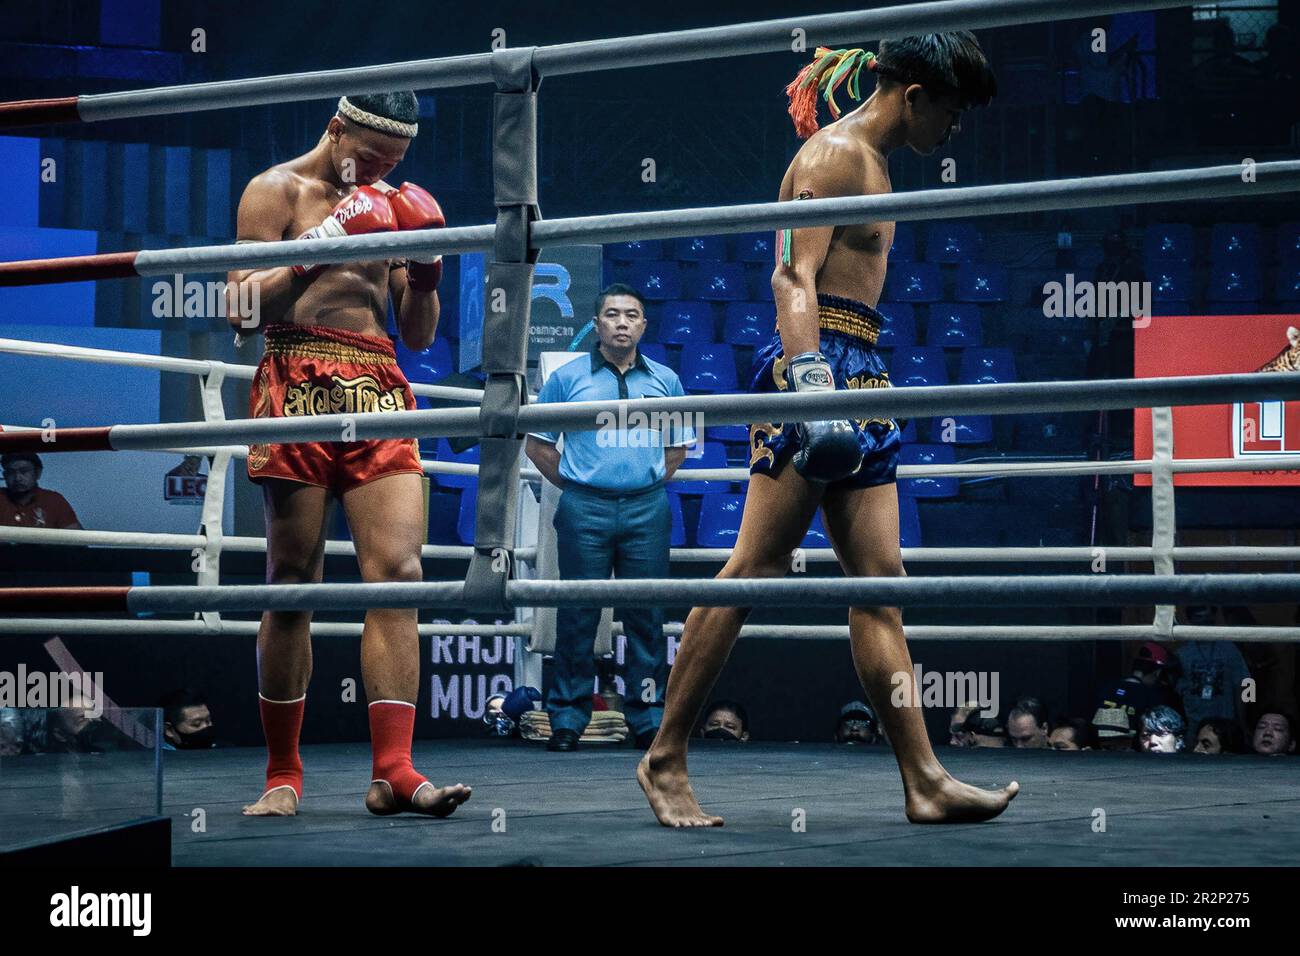 Bangkok, Thailand. 07th Nov, 2022. A Muay Thai boxer performs 'Wai Kru' a ritual ceremony before engaging in battle which is a thank you and blessing to show deep respect to one's coaches, training partners, and family, at Bangkok's Rajadamnern stadium. Muay Thai fights at Thailand's iconic boxing Rajadamnern stadium, the dream stage for competitors and it is favourite for combat sports all over the world. (Photo by Nathalie Jamois/SOPA Images/Sipa USA) Credit: Sipa USA/Alamy Live News Stock Photo